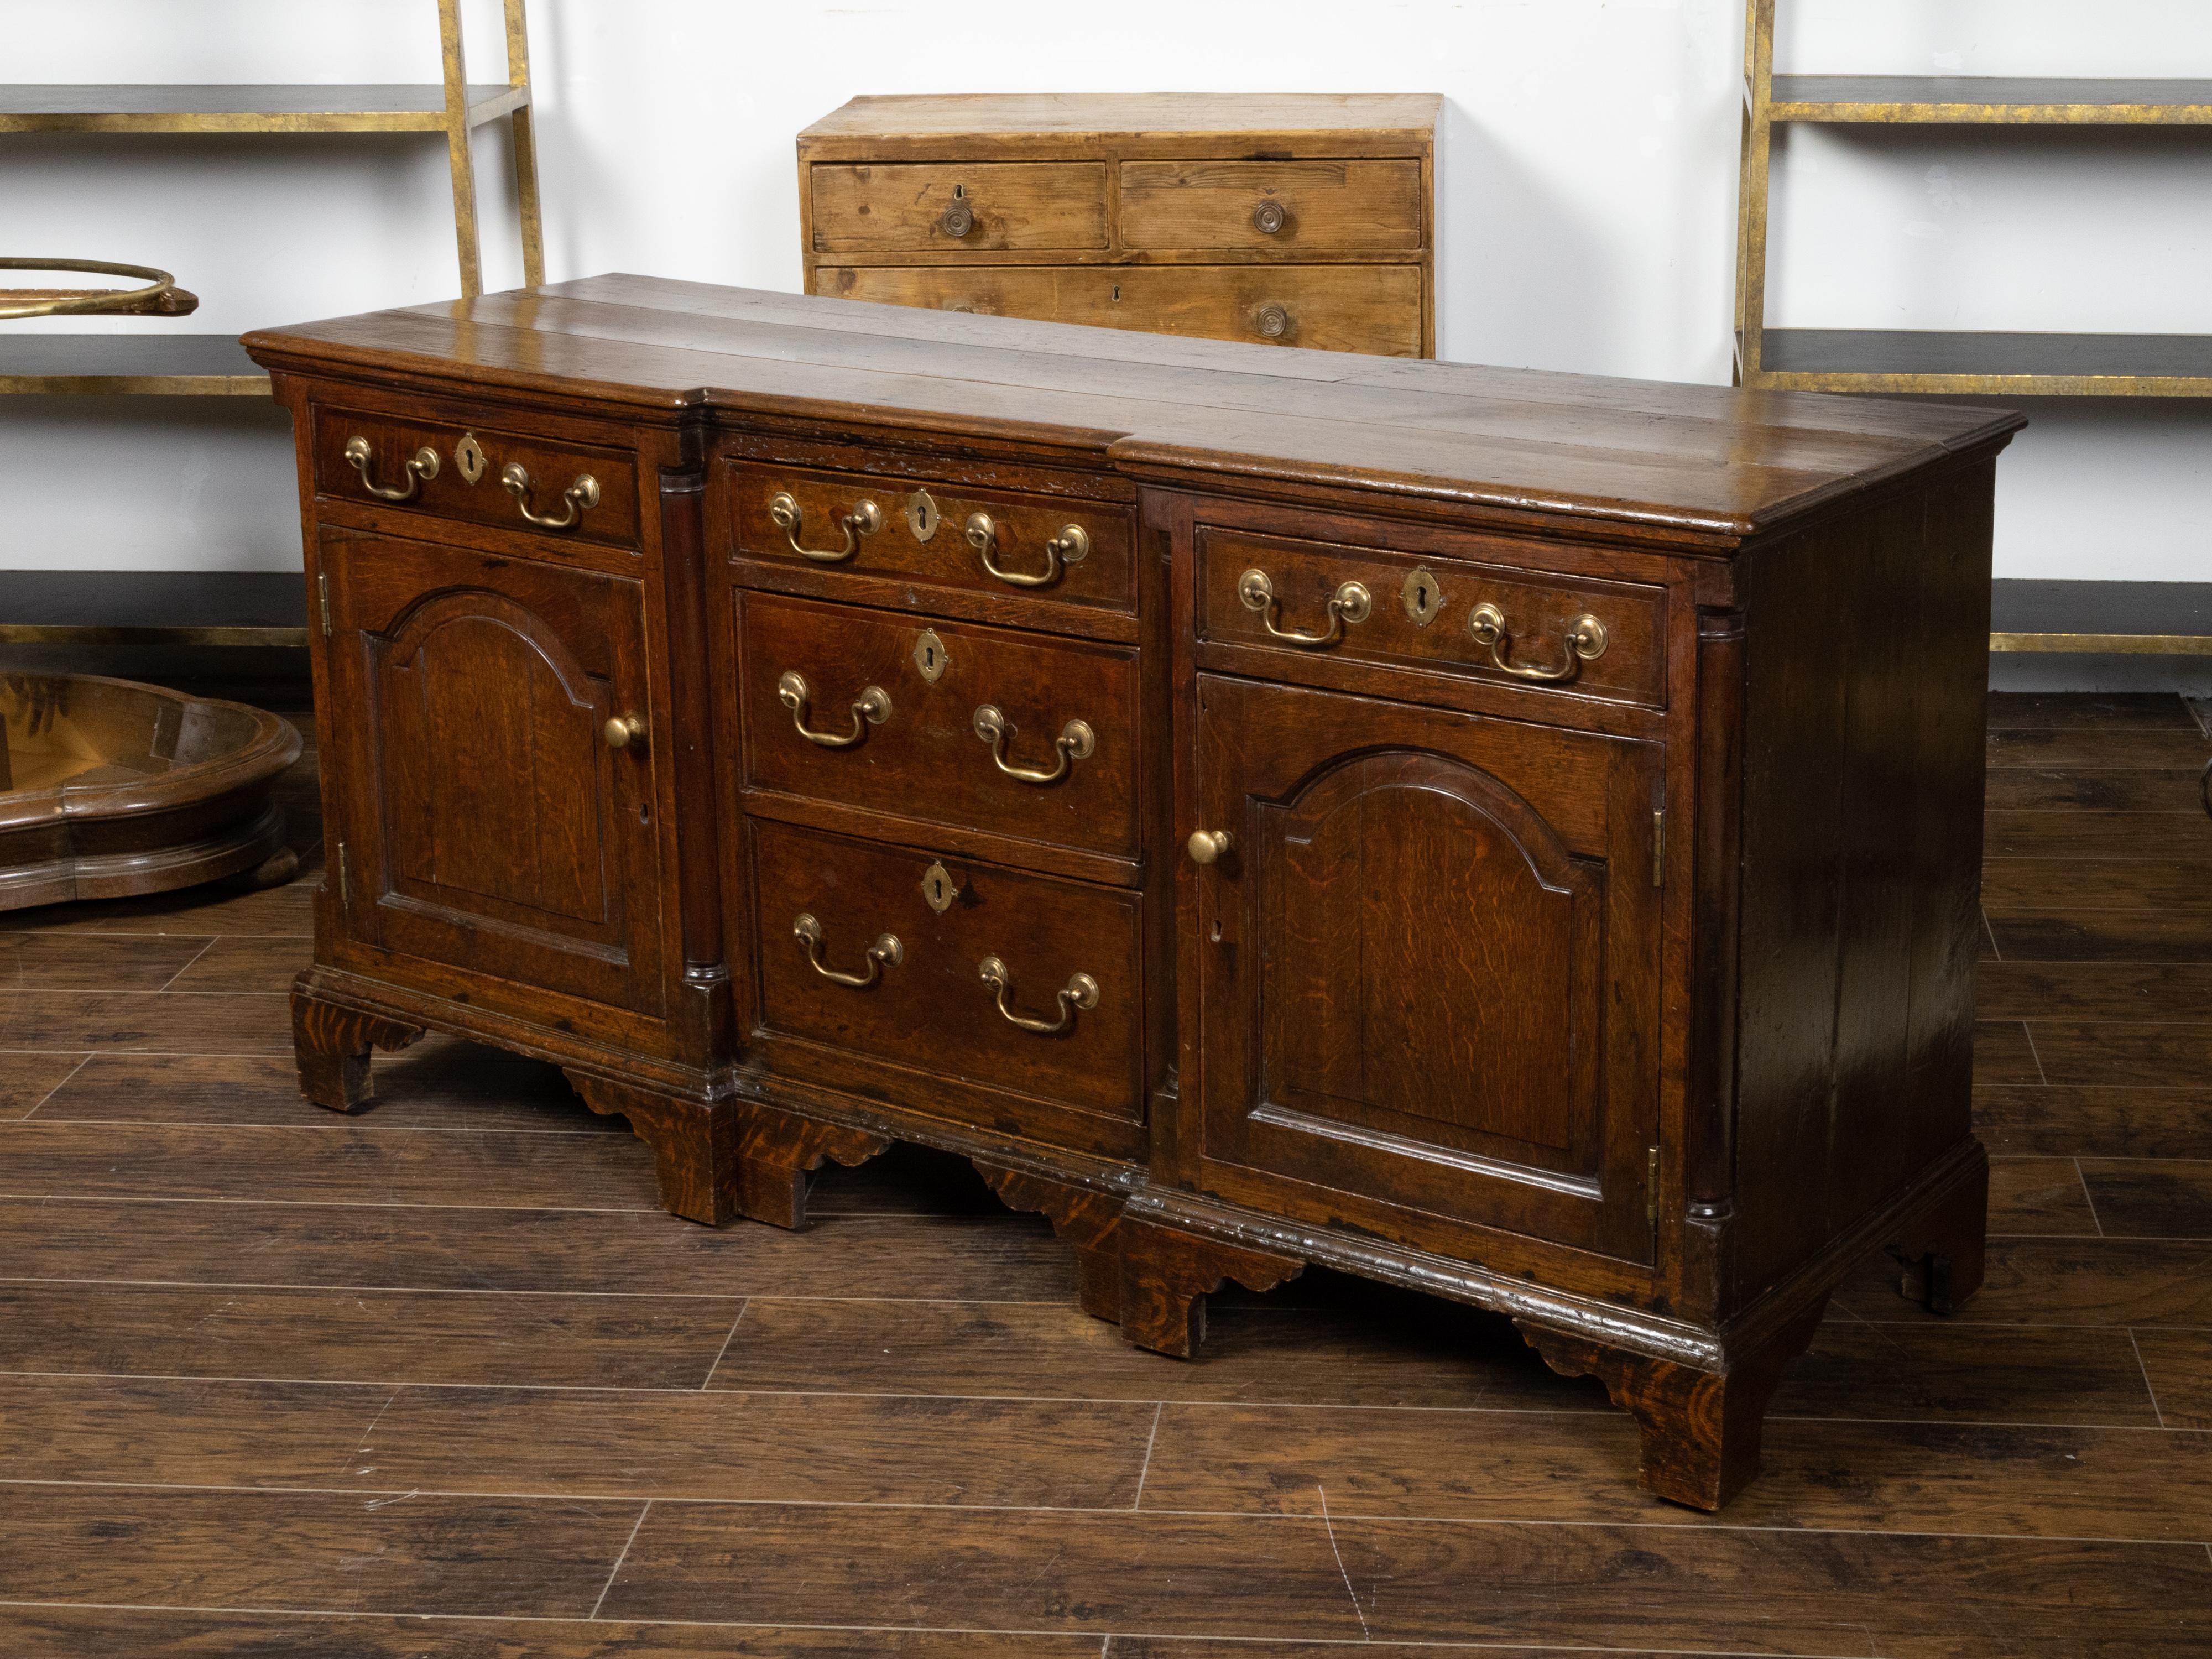 English Georgian Period 1800s Oak Dresser Base with Five Drawers and Two Doors In Good Condition For Sale In Atlanta, GA